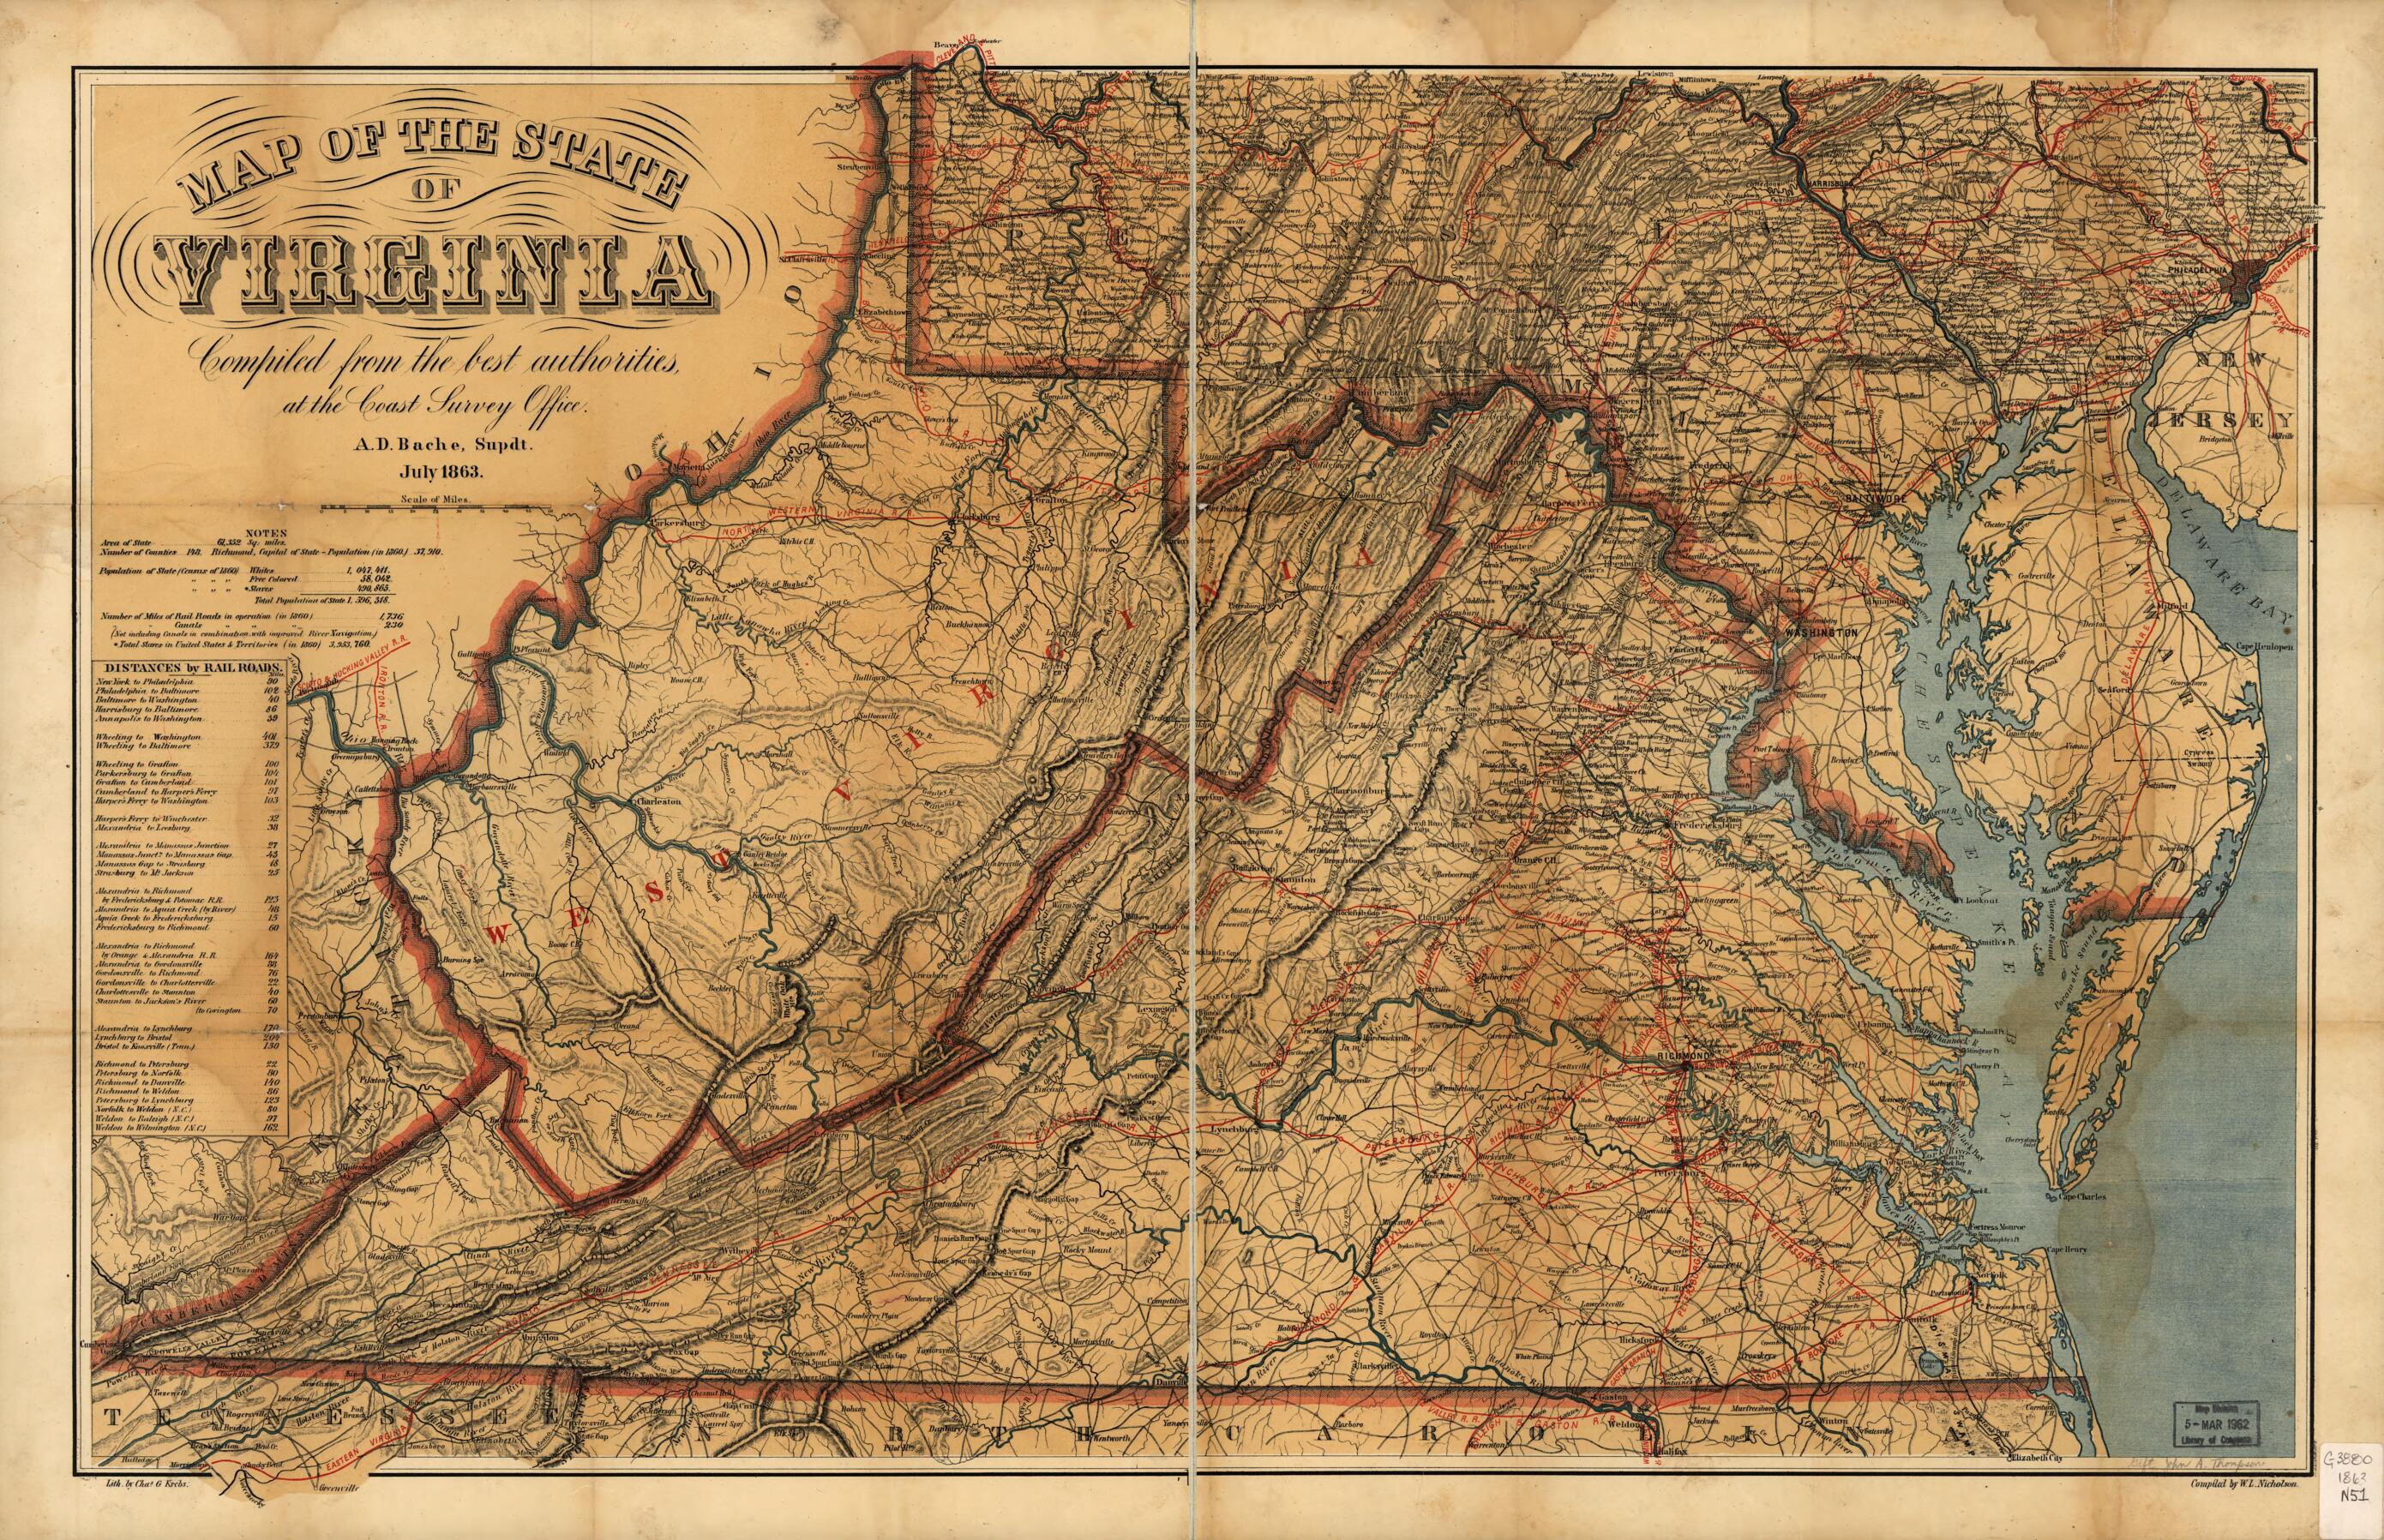 This old map of Map of the State of Virginia from 1863 was created by W. L. Nicholson in 1863